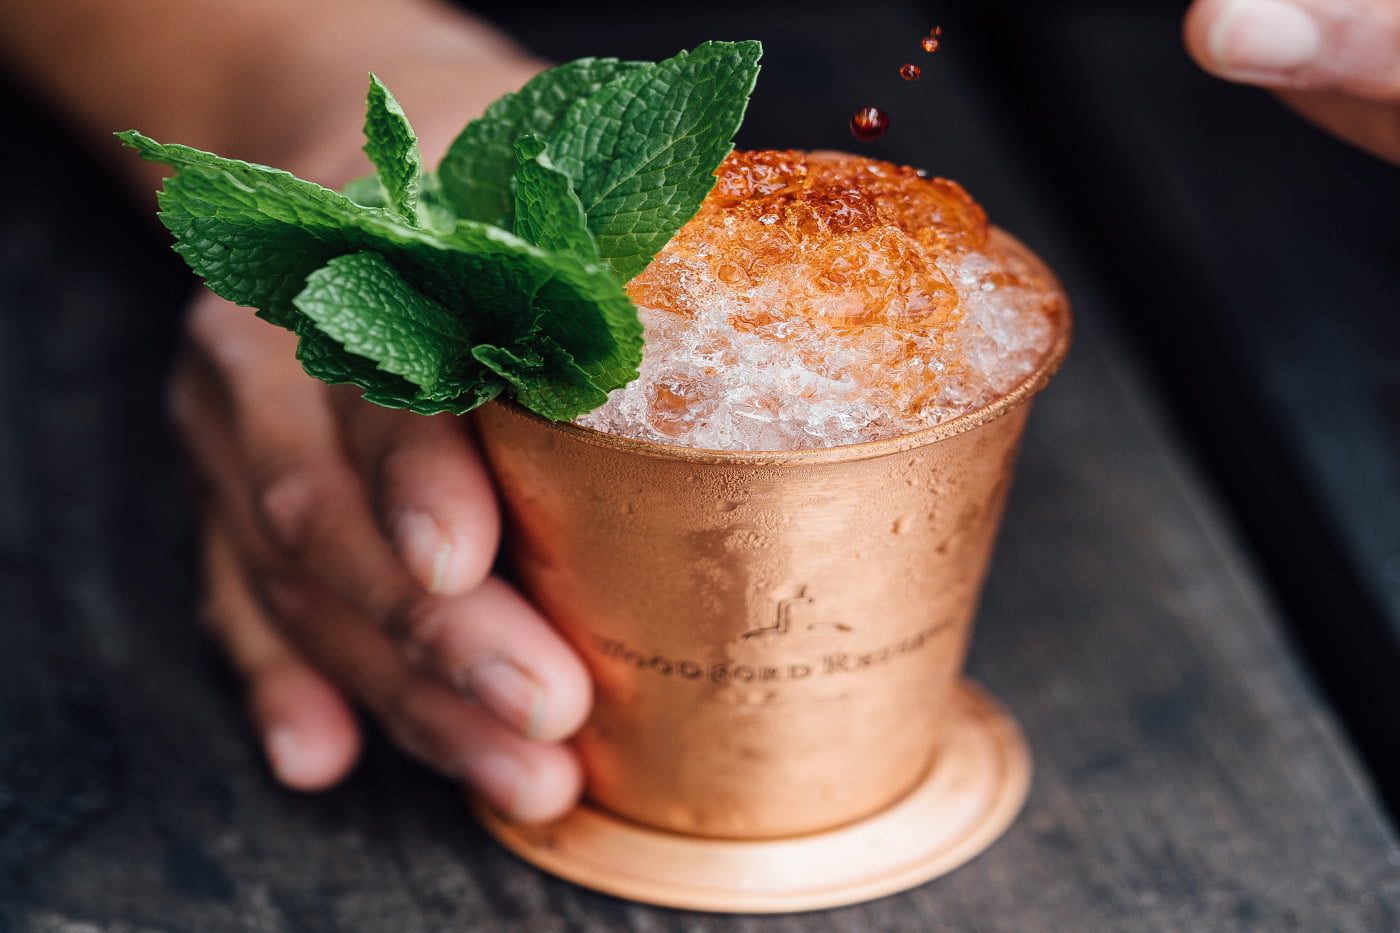 Copper Moscow Mule Mugs Could Be Dangerous...